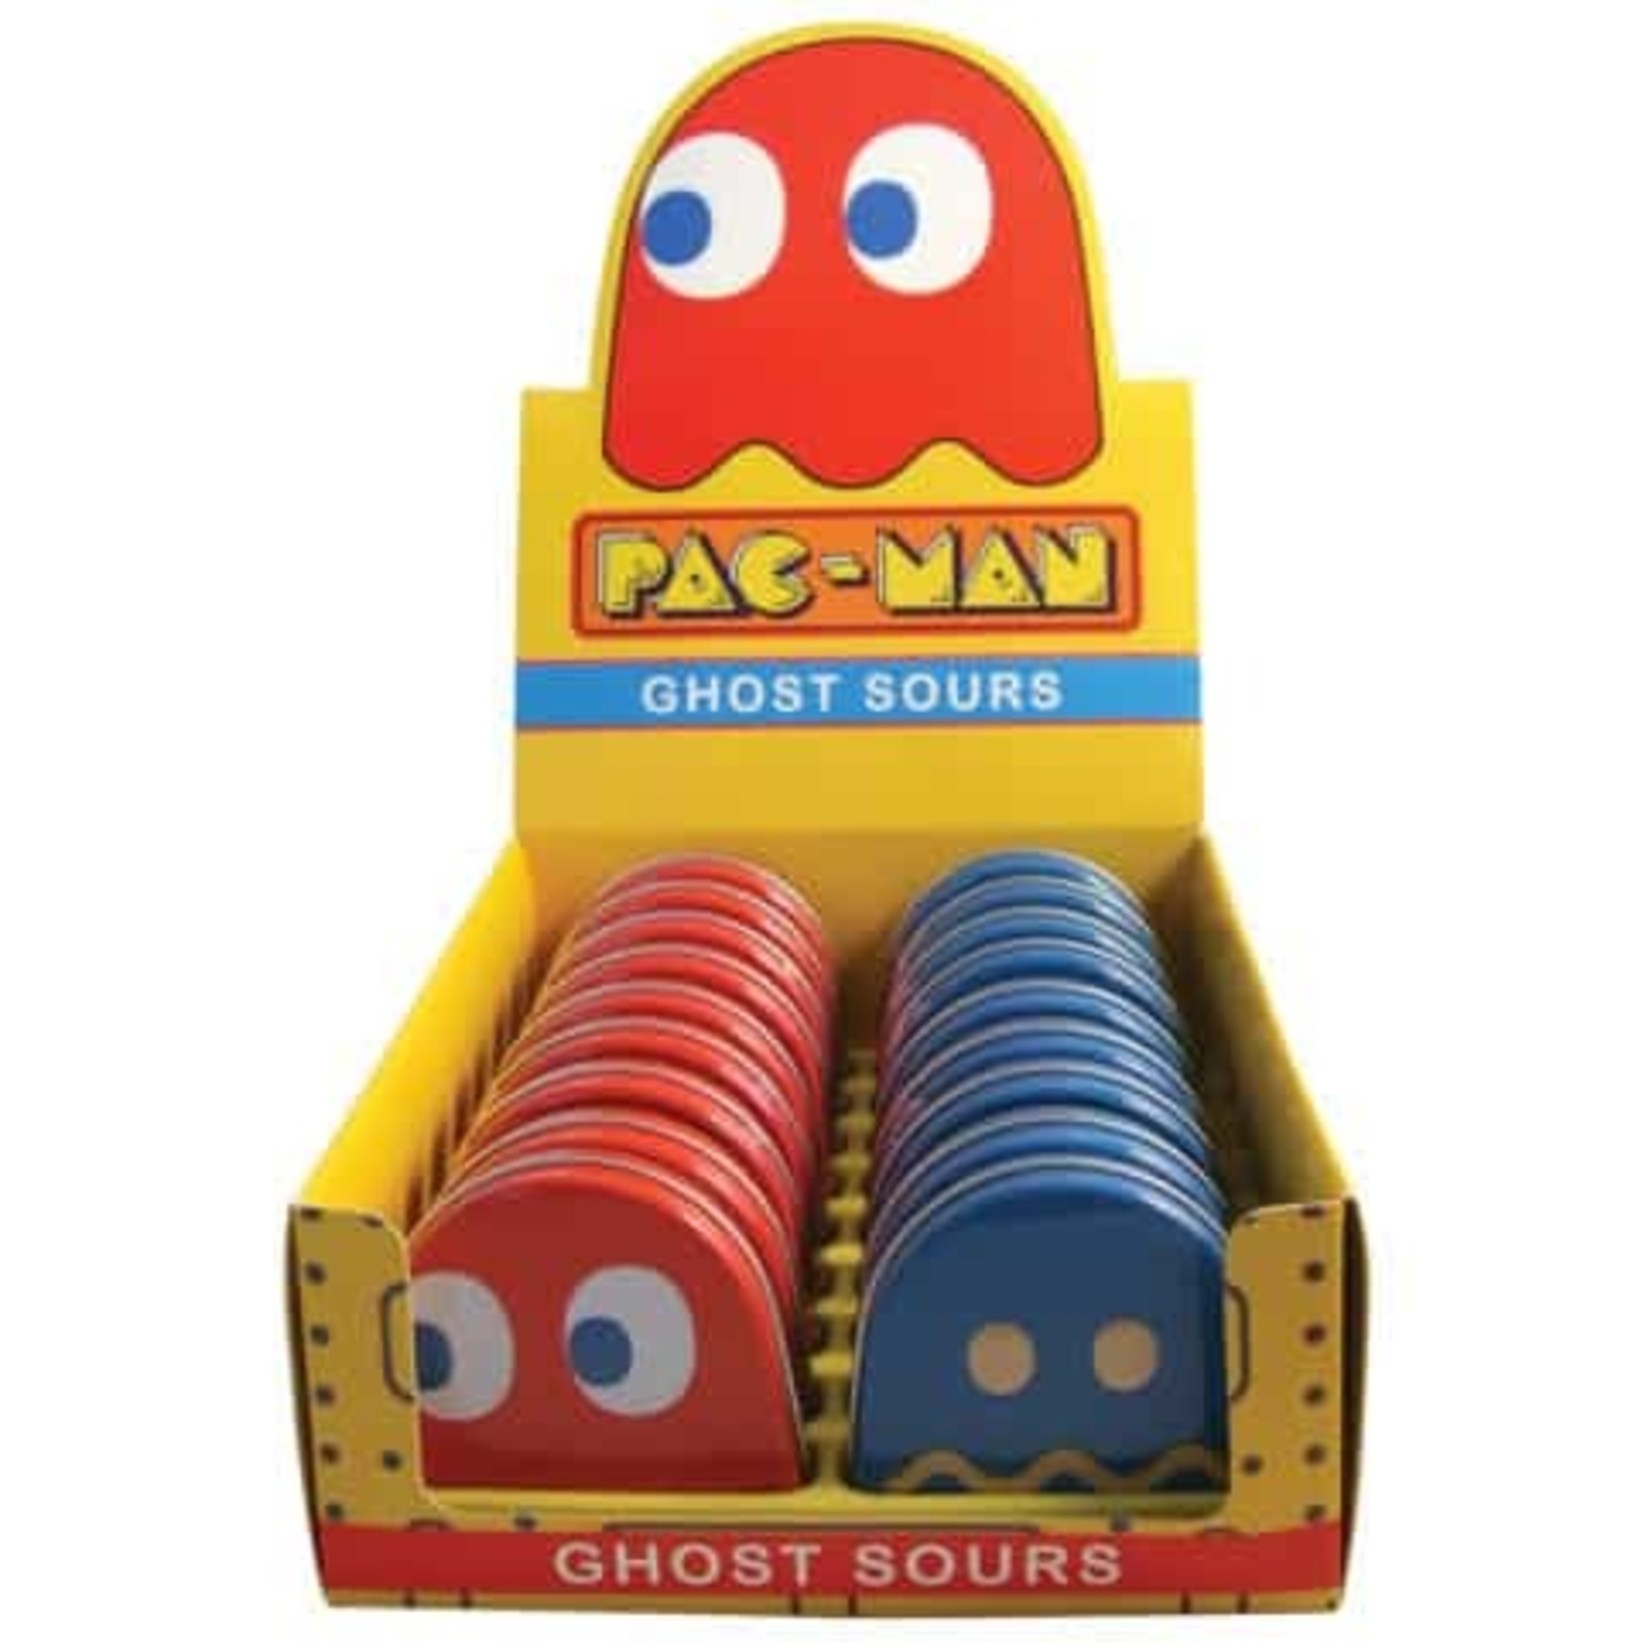 Pac Man Ghost Sours